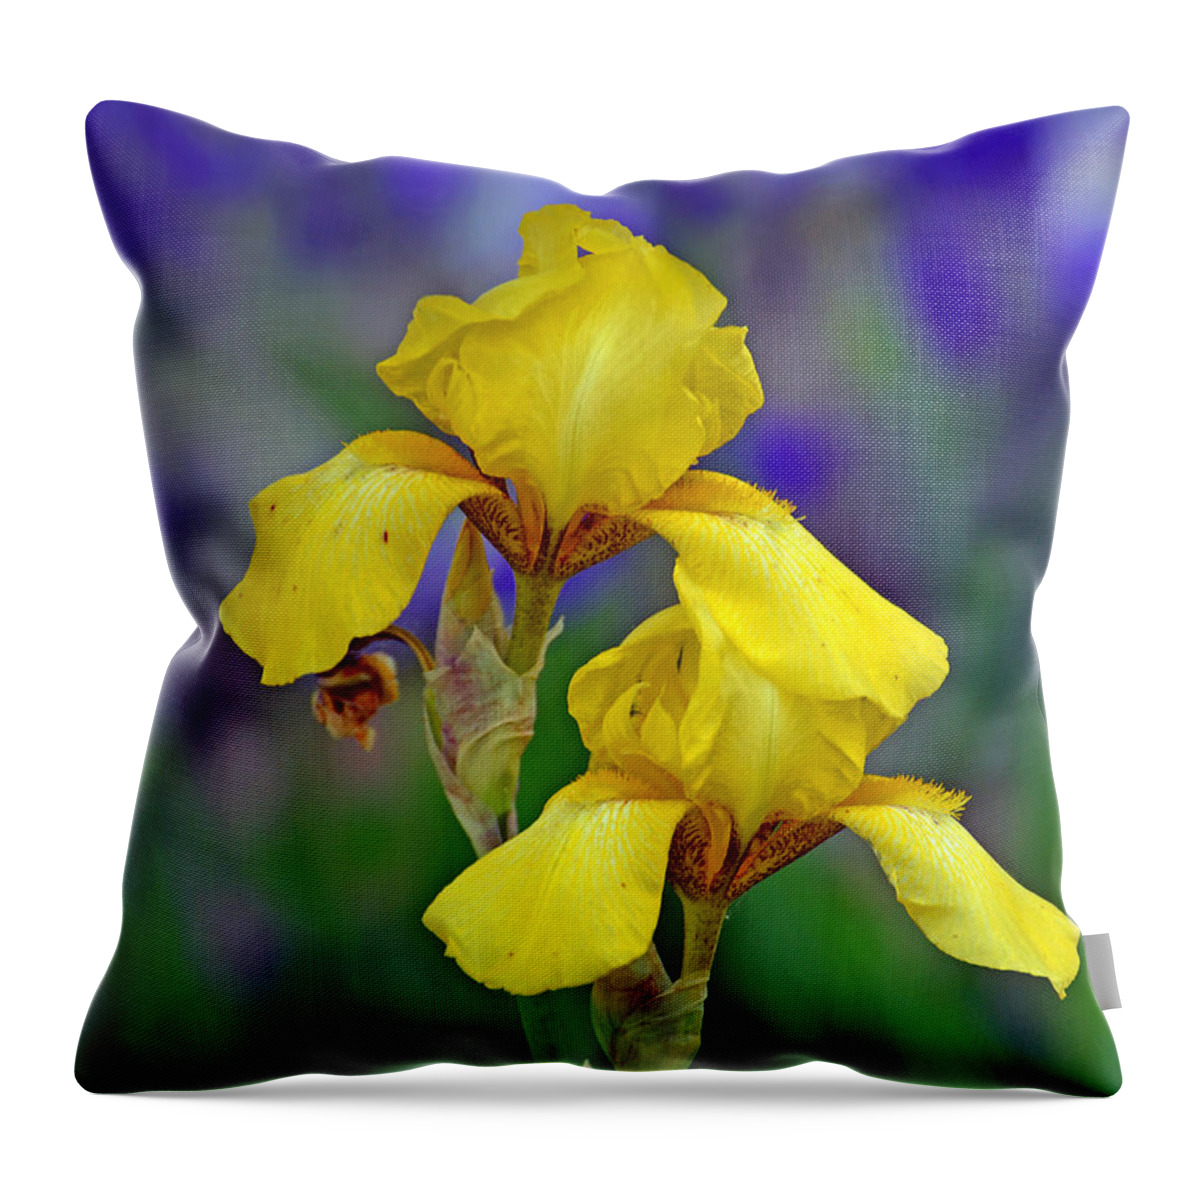 Iris Throw Pillow featuring the photograph Yellow Iris by Rodney Campbell